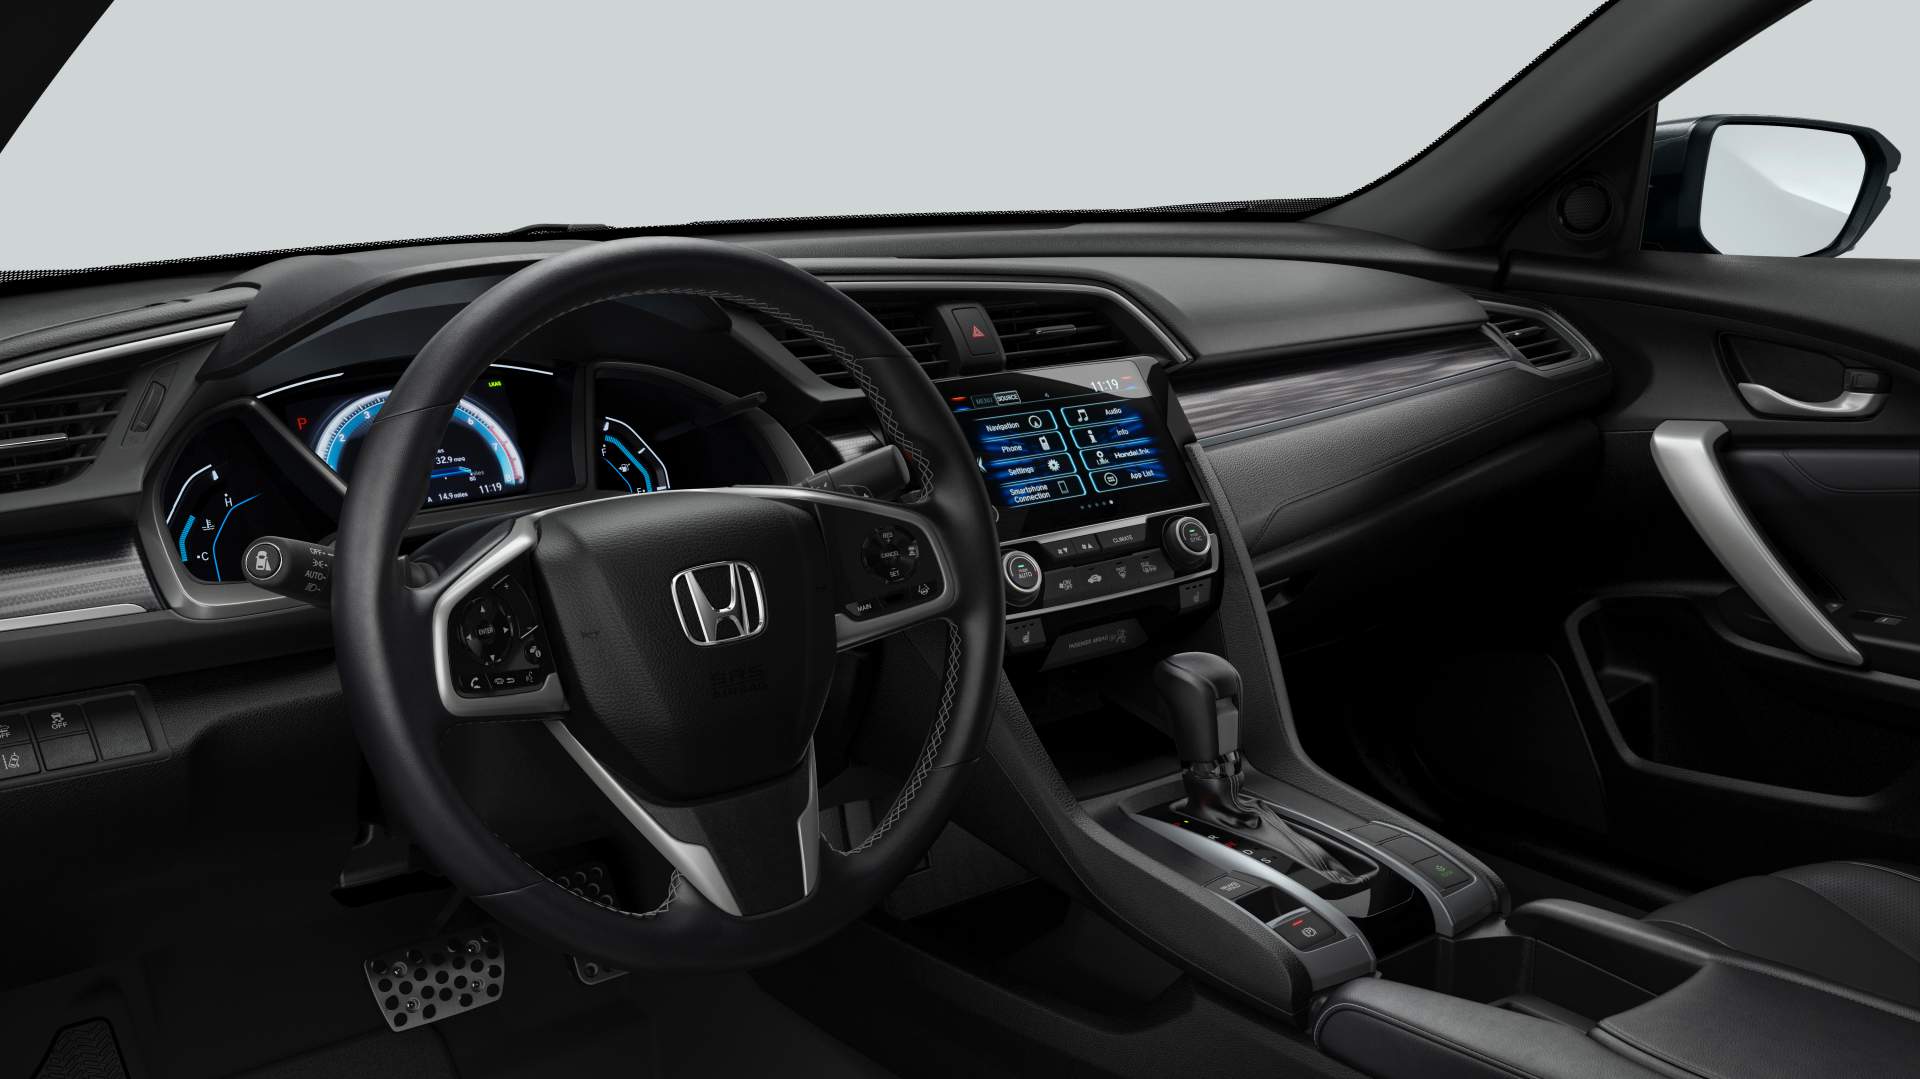 Honda Details 2019 Civic Sedan And Coupe Updates Releases Pricing